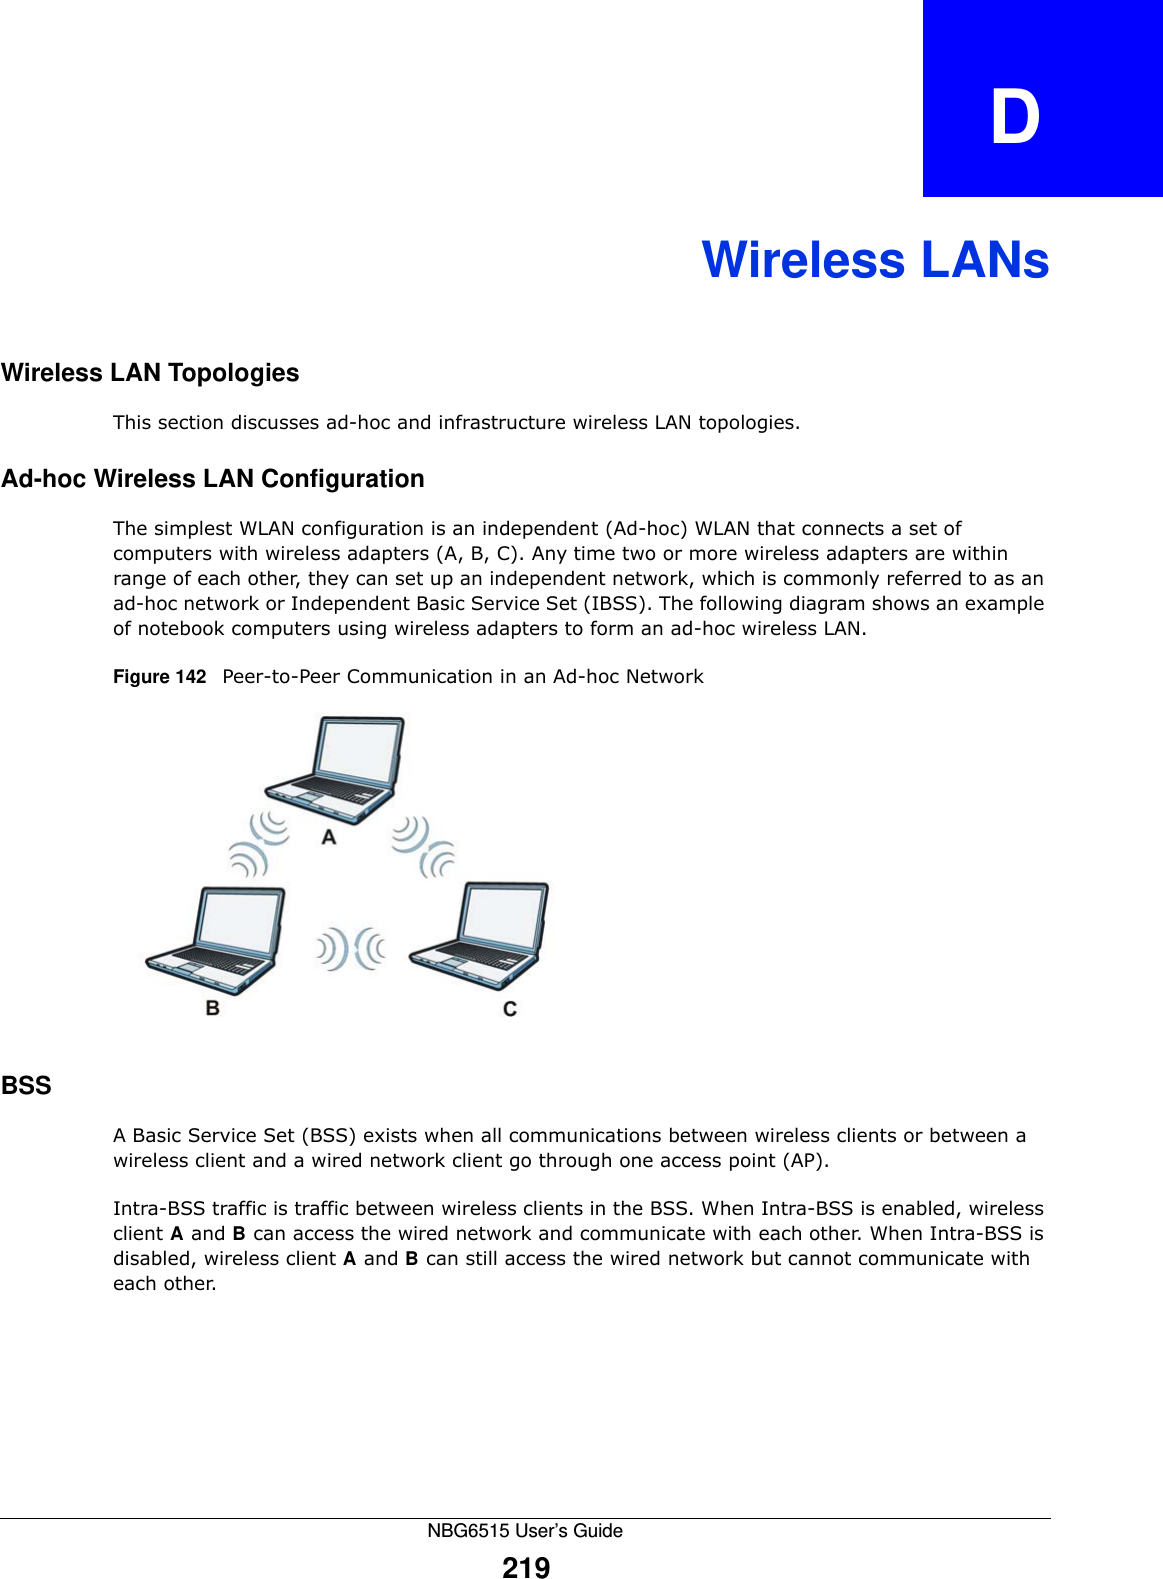 NBG6515 User’s Guide219APPENDIX   DWireless LANsWireless LAN TopologiesThis section discusses ad-hoc and infrastructure wireless LAN topologies.Ad-hoc Wireless LAN ConfigurationThe simplest WLAN configuration is an independent (Ad-hoc) WLAN that connects a set of computers with wireless adapters (A, B, C). Any time two or more wireless adapters are within range of each other, they can set up an independent network, which is commonly referred to as an ad-hoc network or Independent Basic Service Set (IBSS). The following diagram shows an example of notebook computers using wireless adapters to form an ad-hoc wireless LAN. Figure 142   Peer-to-Peer Communication in an Ad-hoc NetworkBSSA Basic Service Set (BSS) exists when all communications between wireless clients or between a wireless client and a wired network client go through one access point (AP). Intra-BSS traffic is traffic between wireless clients in the BSS. When Intra-BSS is enabled, wireless client A and B can access the wired network and communicate with each other. When Intra-BSS is disabled, wireless client A and B can still access the wired network but cannot communicate with each other.